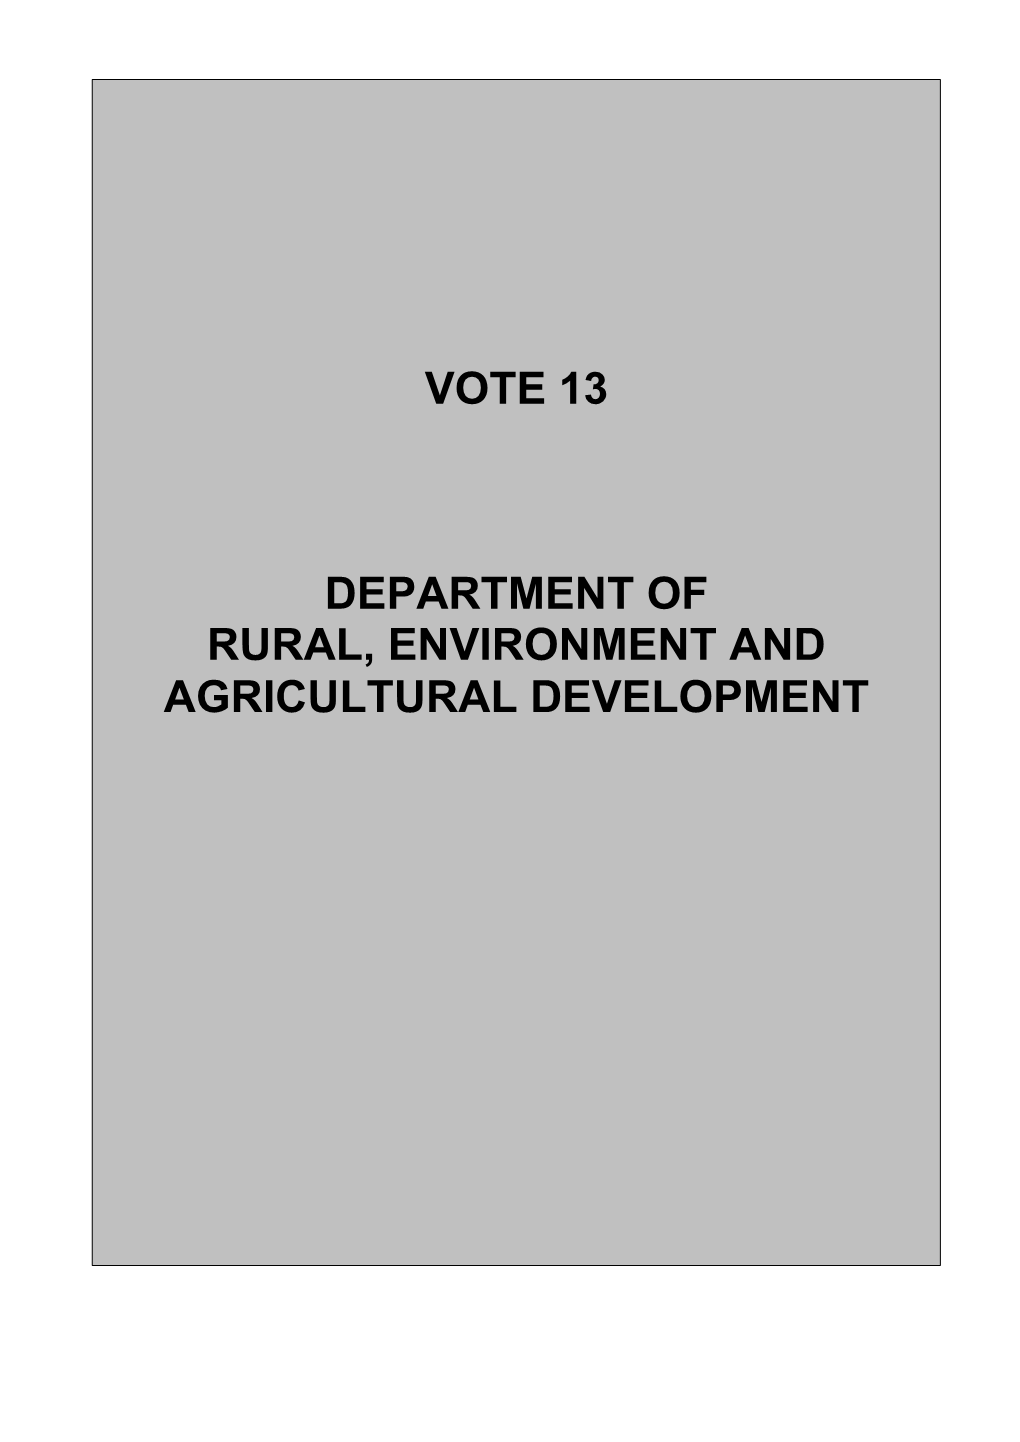 AGRICULTURAL DEVELOPMENT Department of Rural, Environment and Agricultural Development